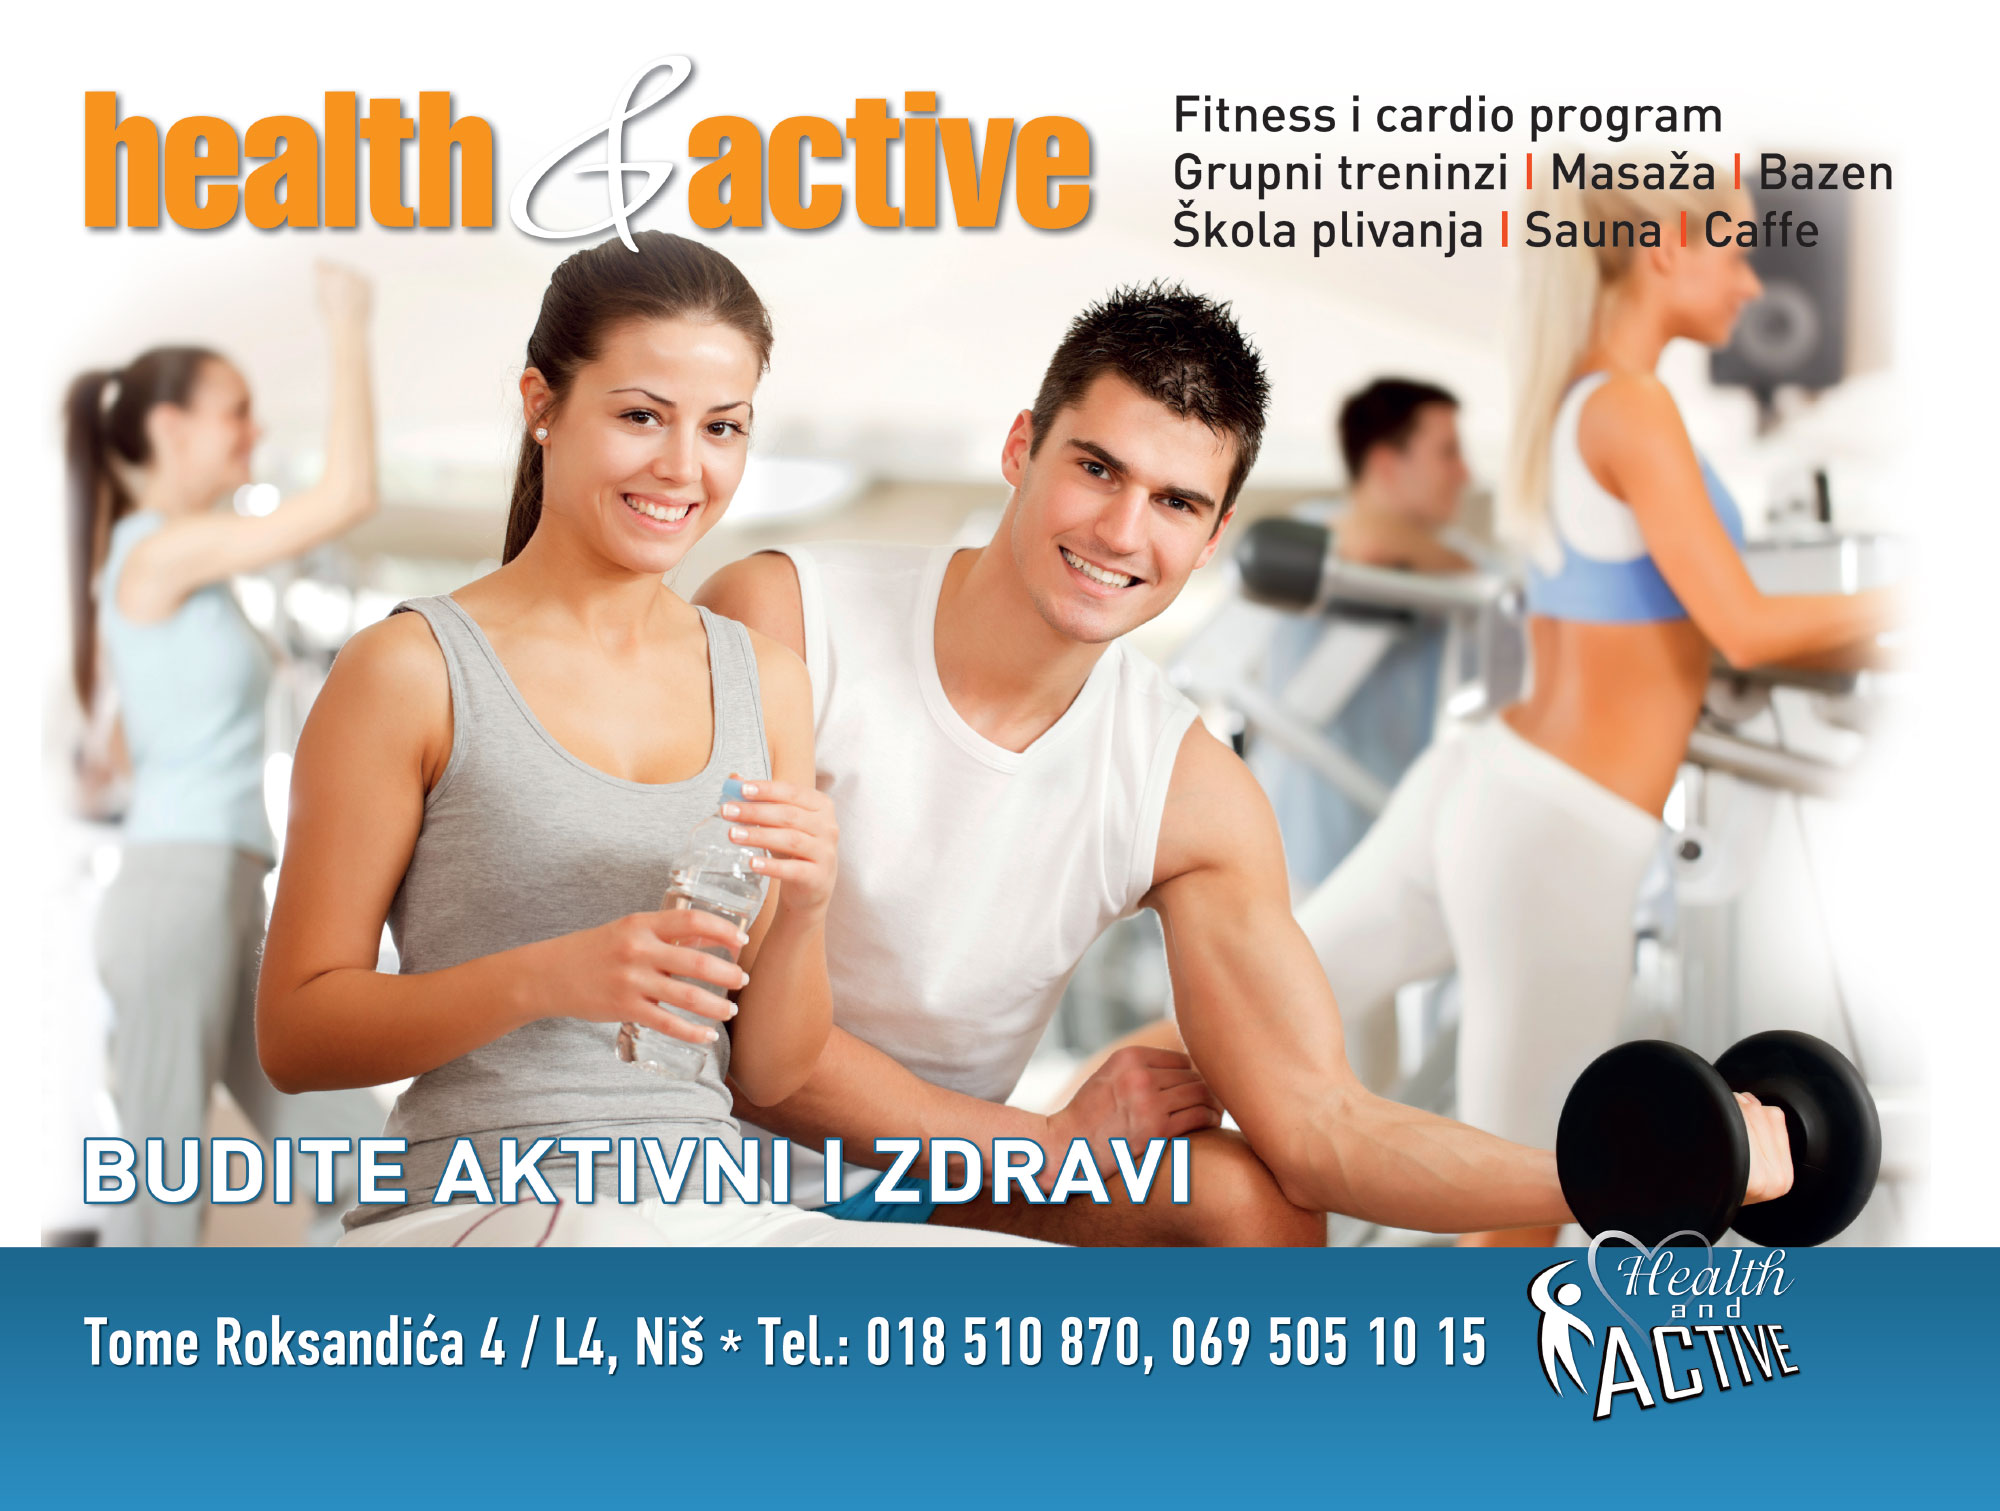 health & active poster 1